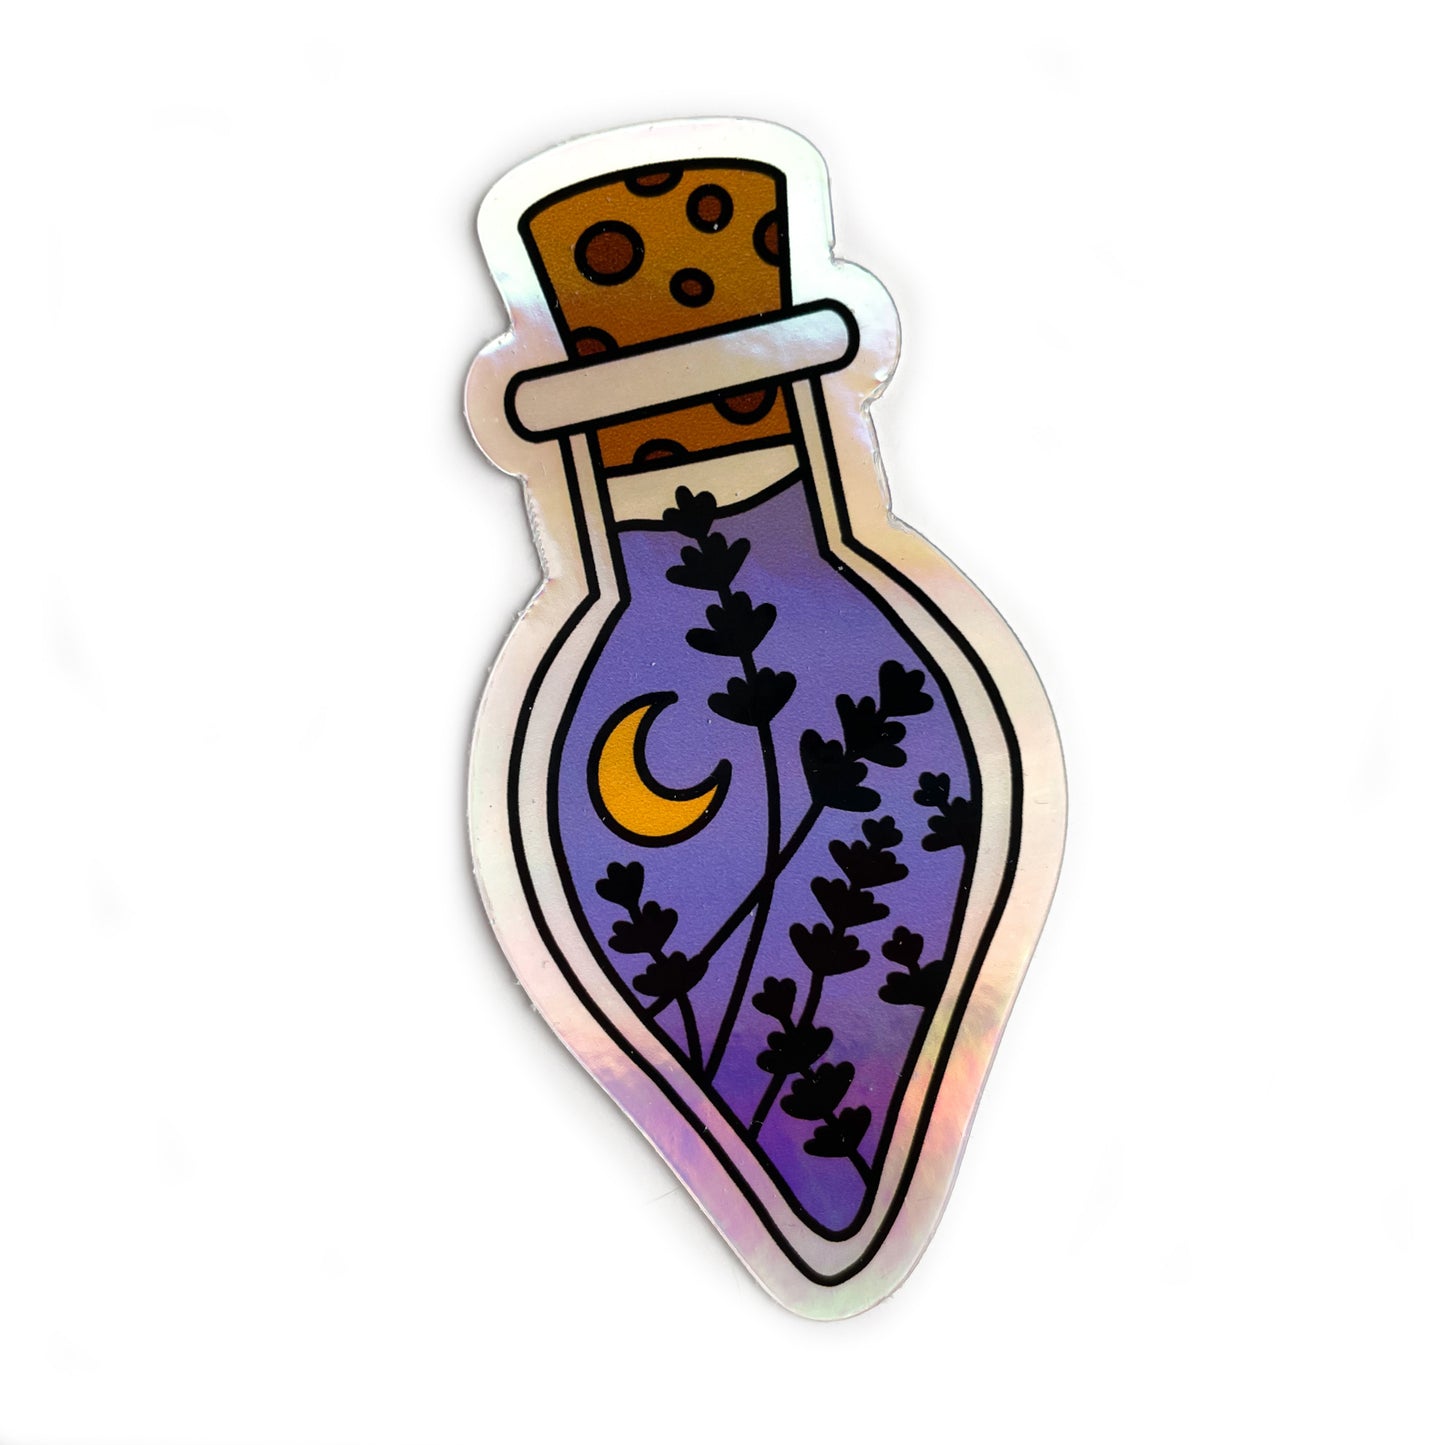 A holographic sticker in the shape of a tear drop shaped potion bottle. The bottle has a cork and is filled with purple liquid, flowers, and a crescent moon. 